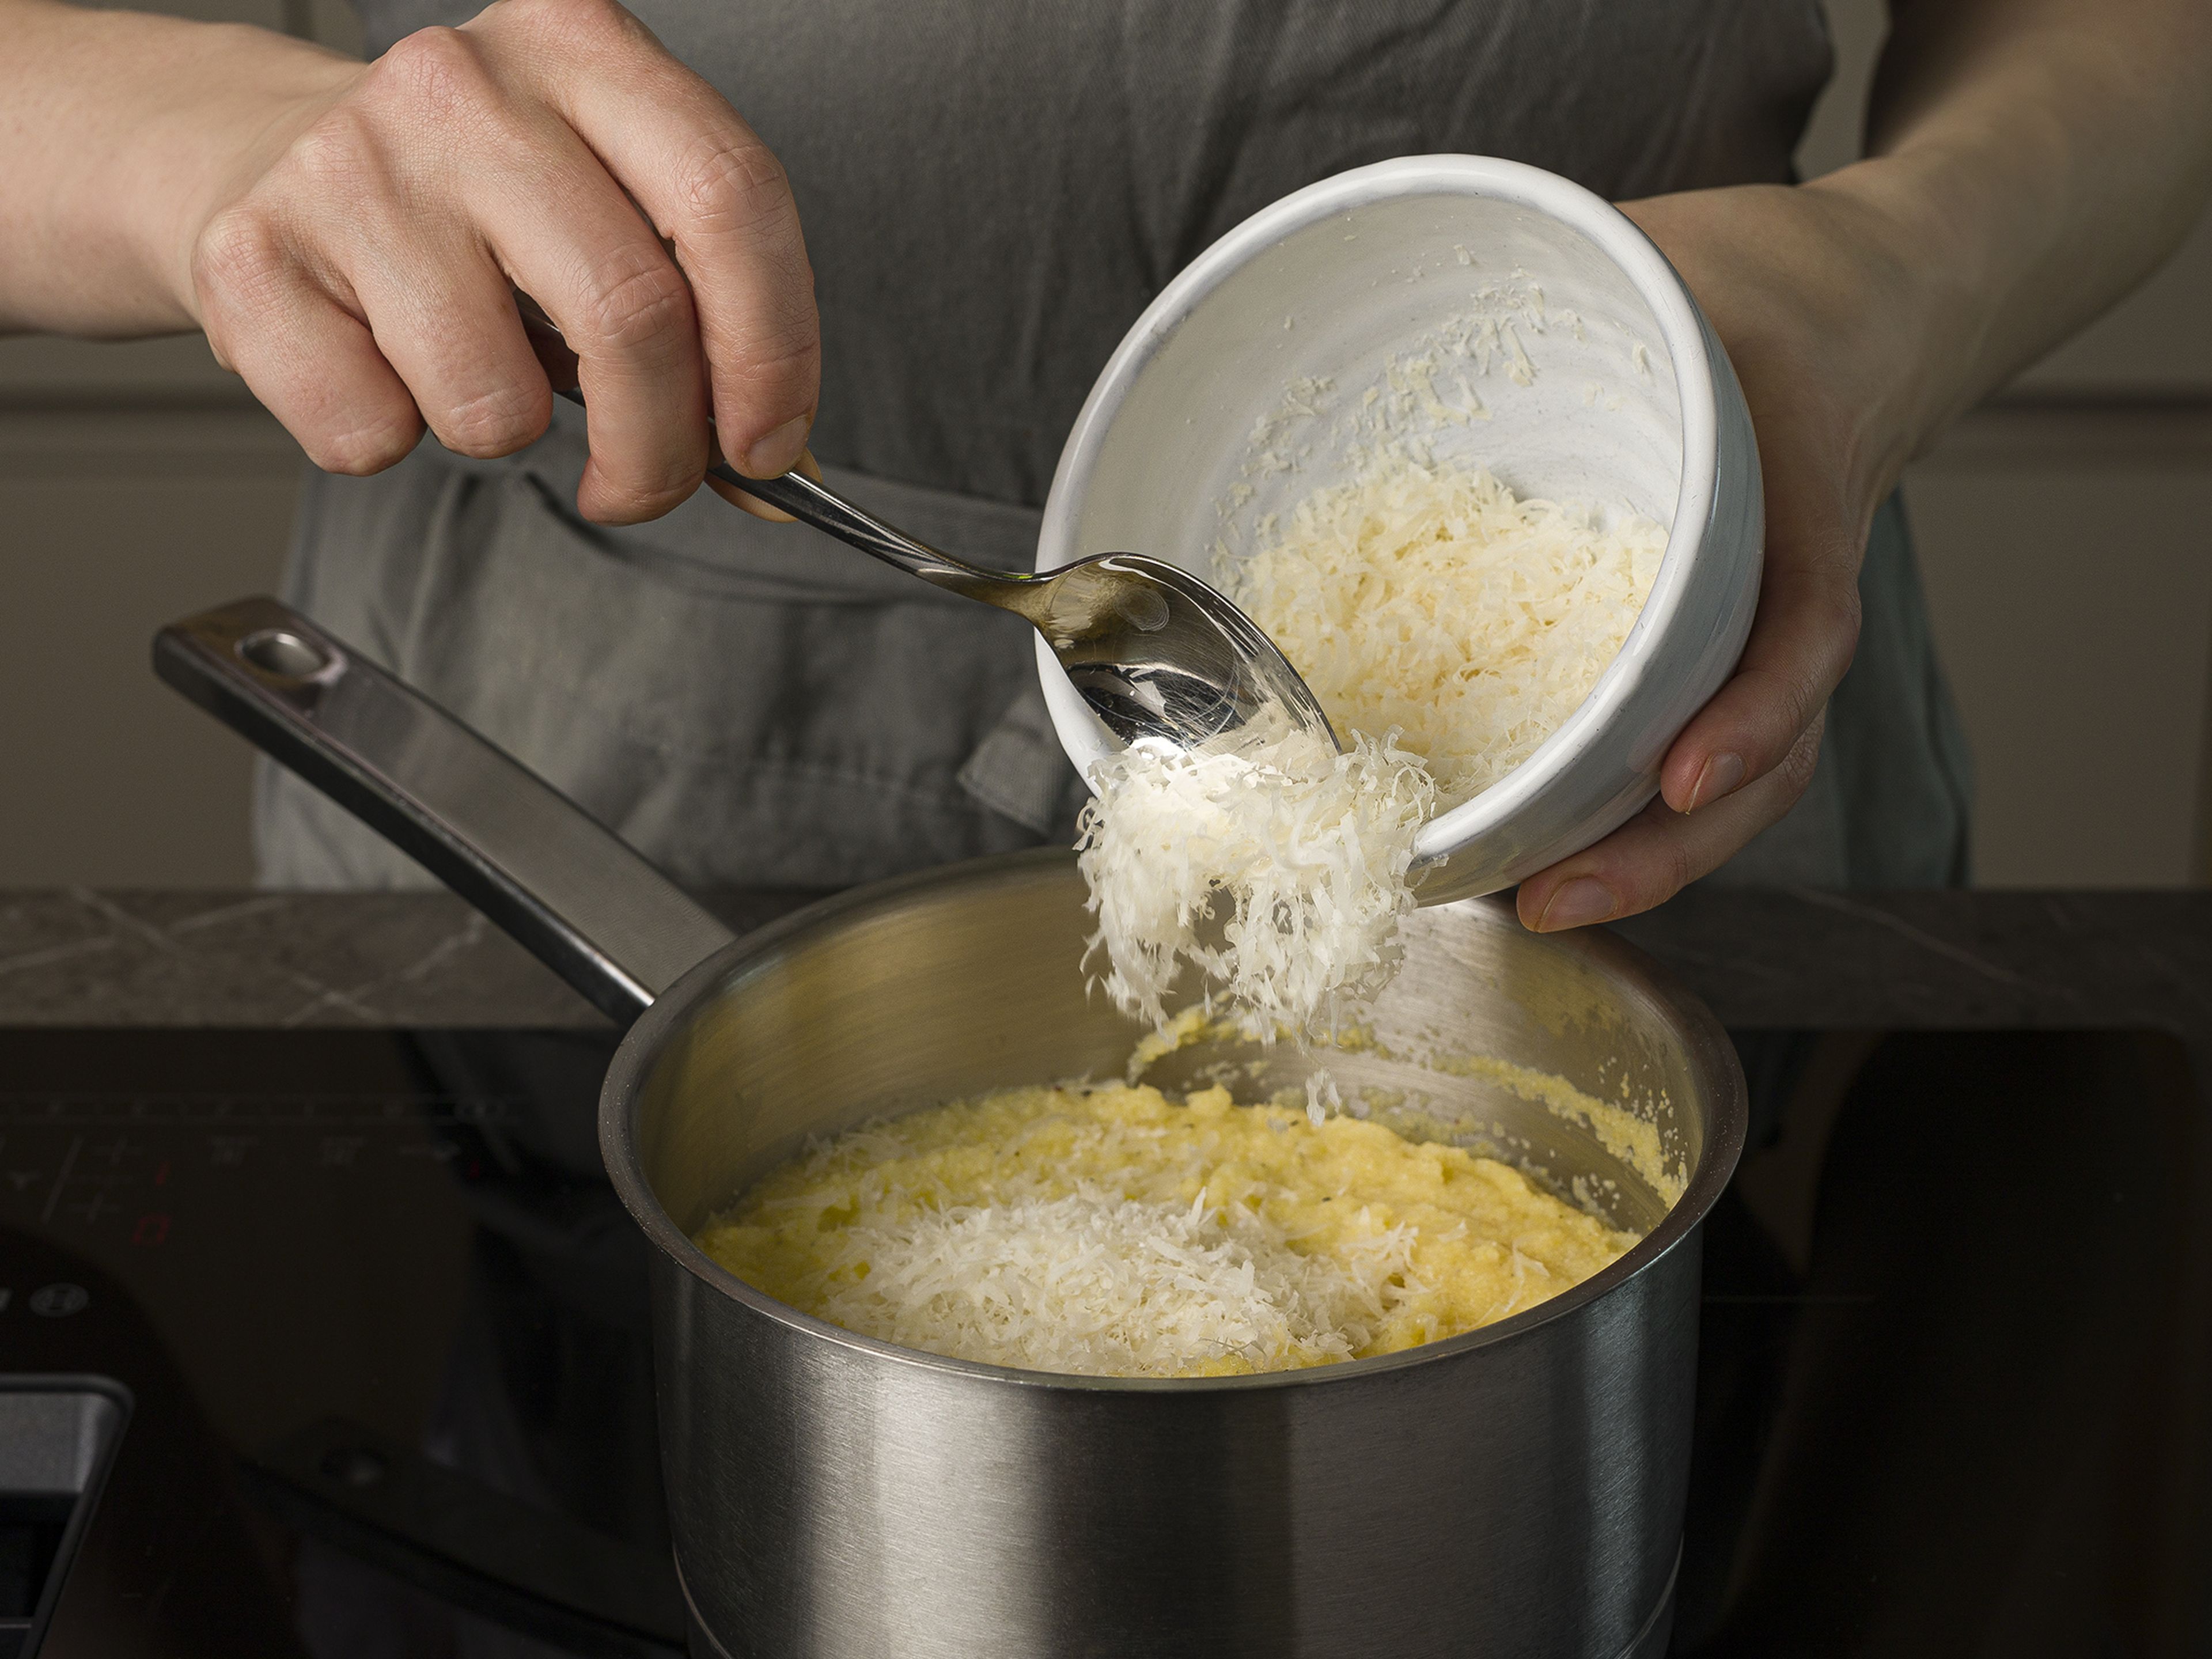 In a pot, heat olive oil over medium-high heat, then add the polenta. Add remaining veggie broth and let cook for approx. 2–4 min. while stirring vigorously. Mix with parmesan and remaining butter and season with salt and pepper. Serve polenta with veggies and more parmesan if desired.